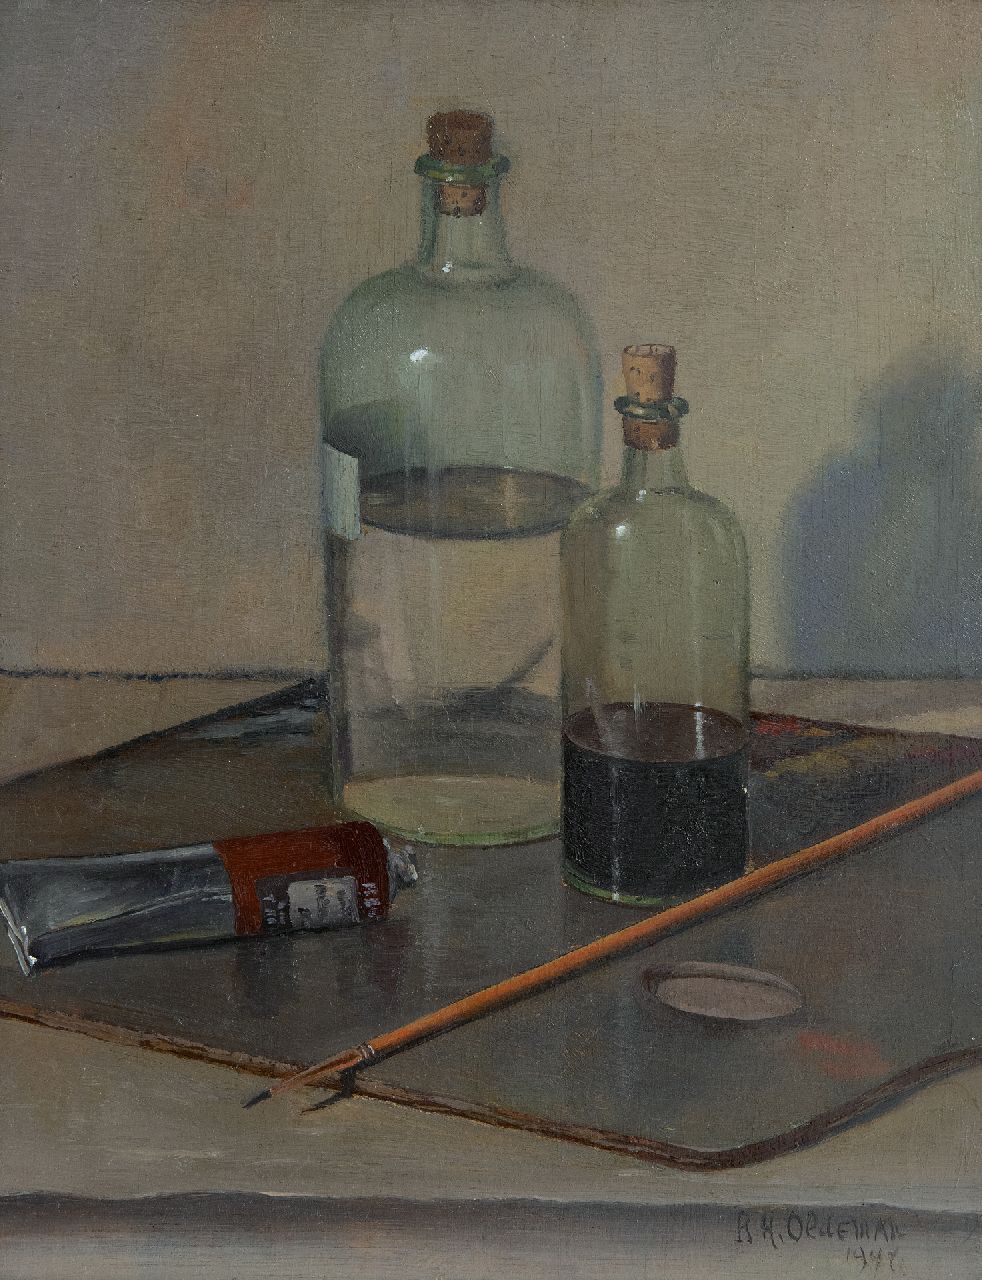 Oldeman R.H.  | Rudolf Hendrik Oldeman | Paintings offered for sale | A painters utensils, oil on panel 32.0 x 25.4 cm, signed l.r. and dated 1948